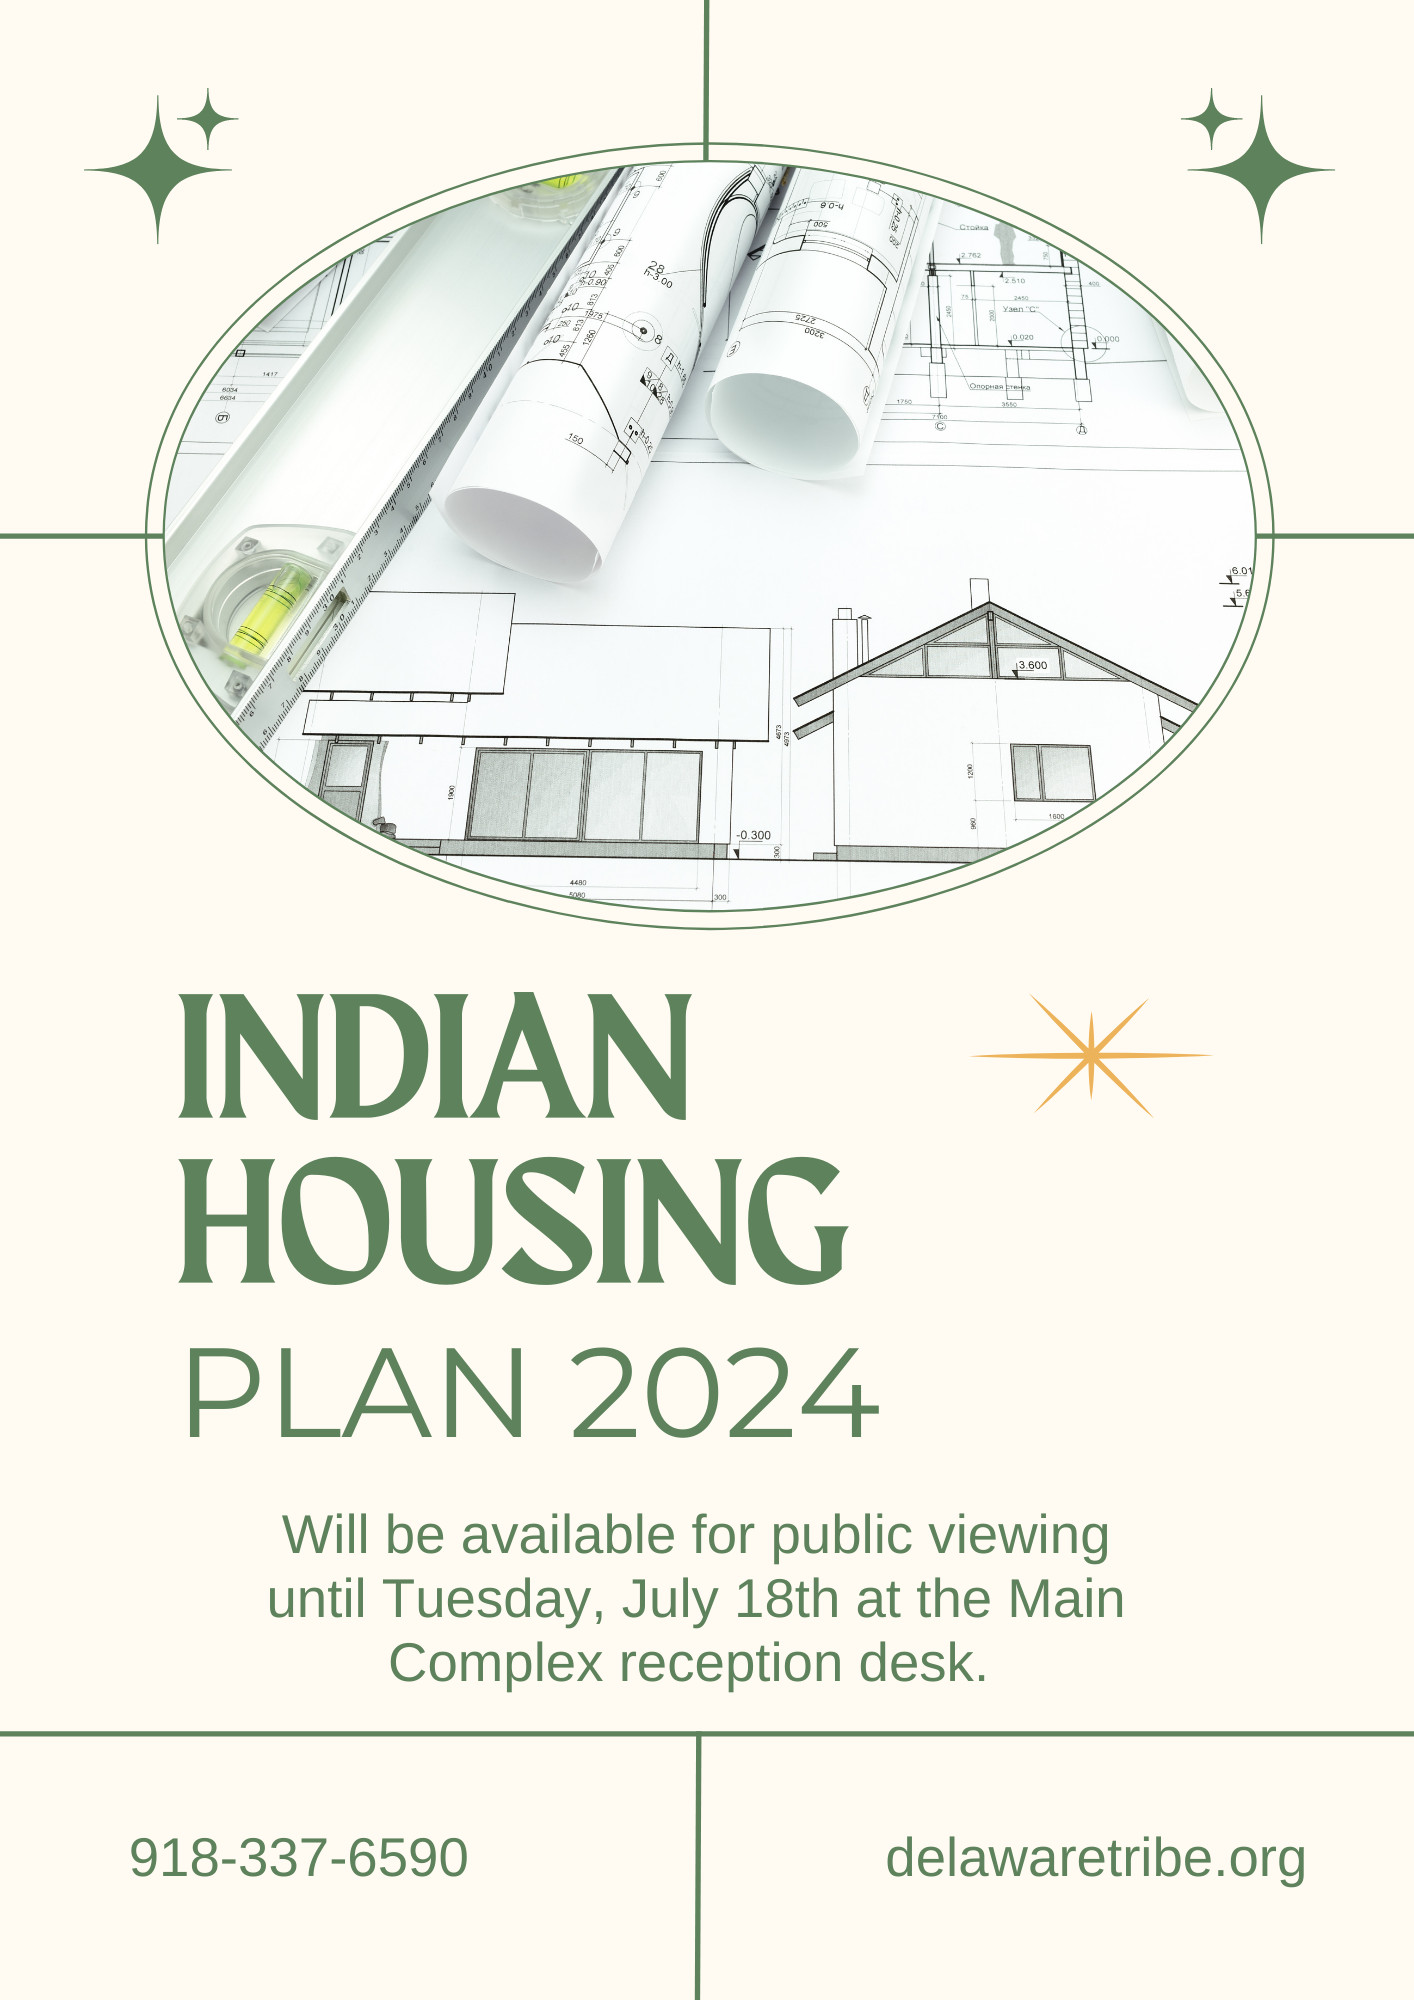 The 2024 Indian Housing Plan will be available for public viewing until Tuesday, July 18 at the Main Complex Reception Desk